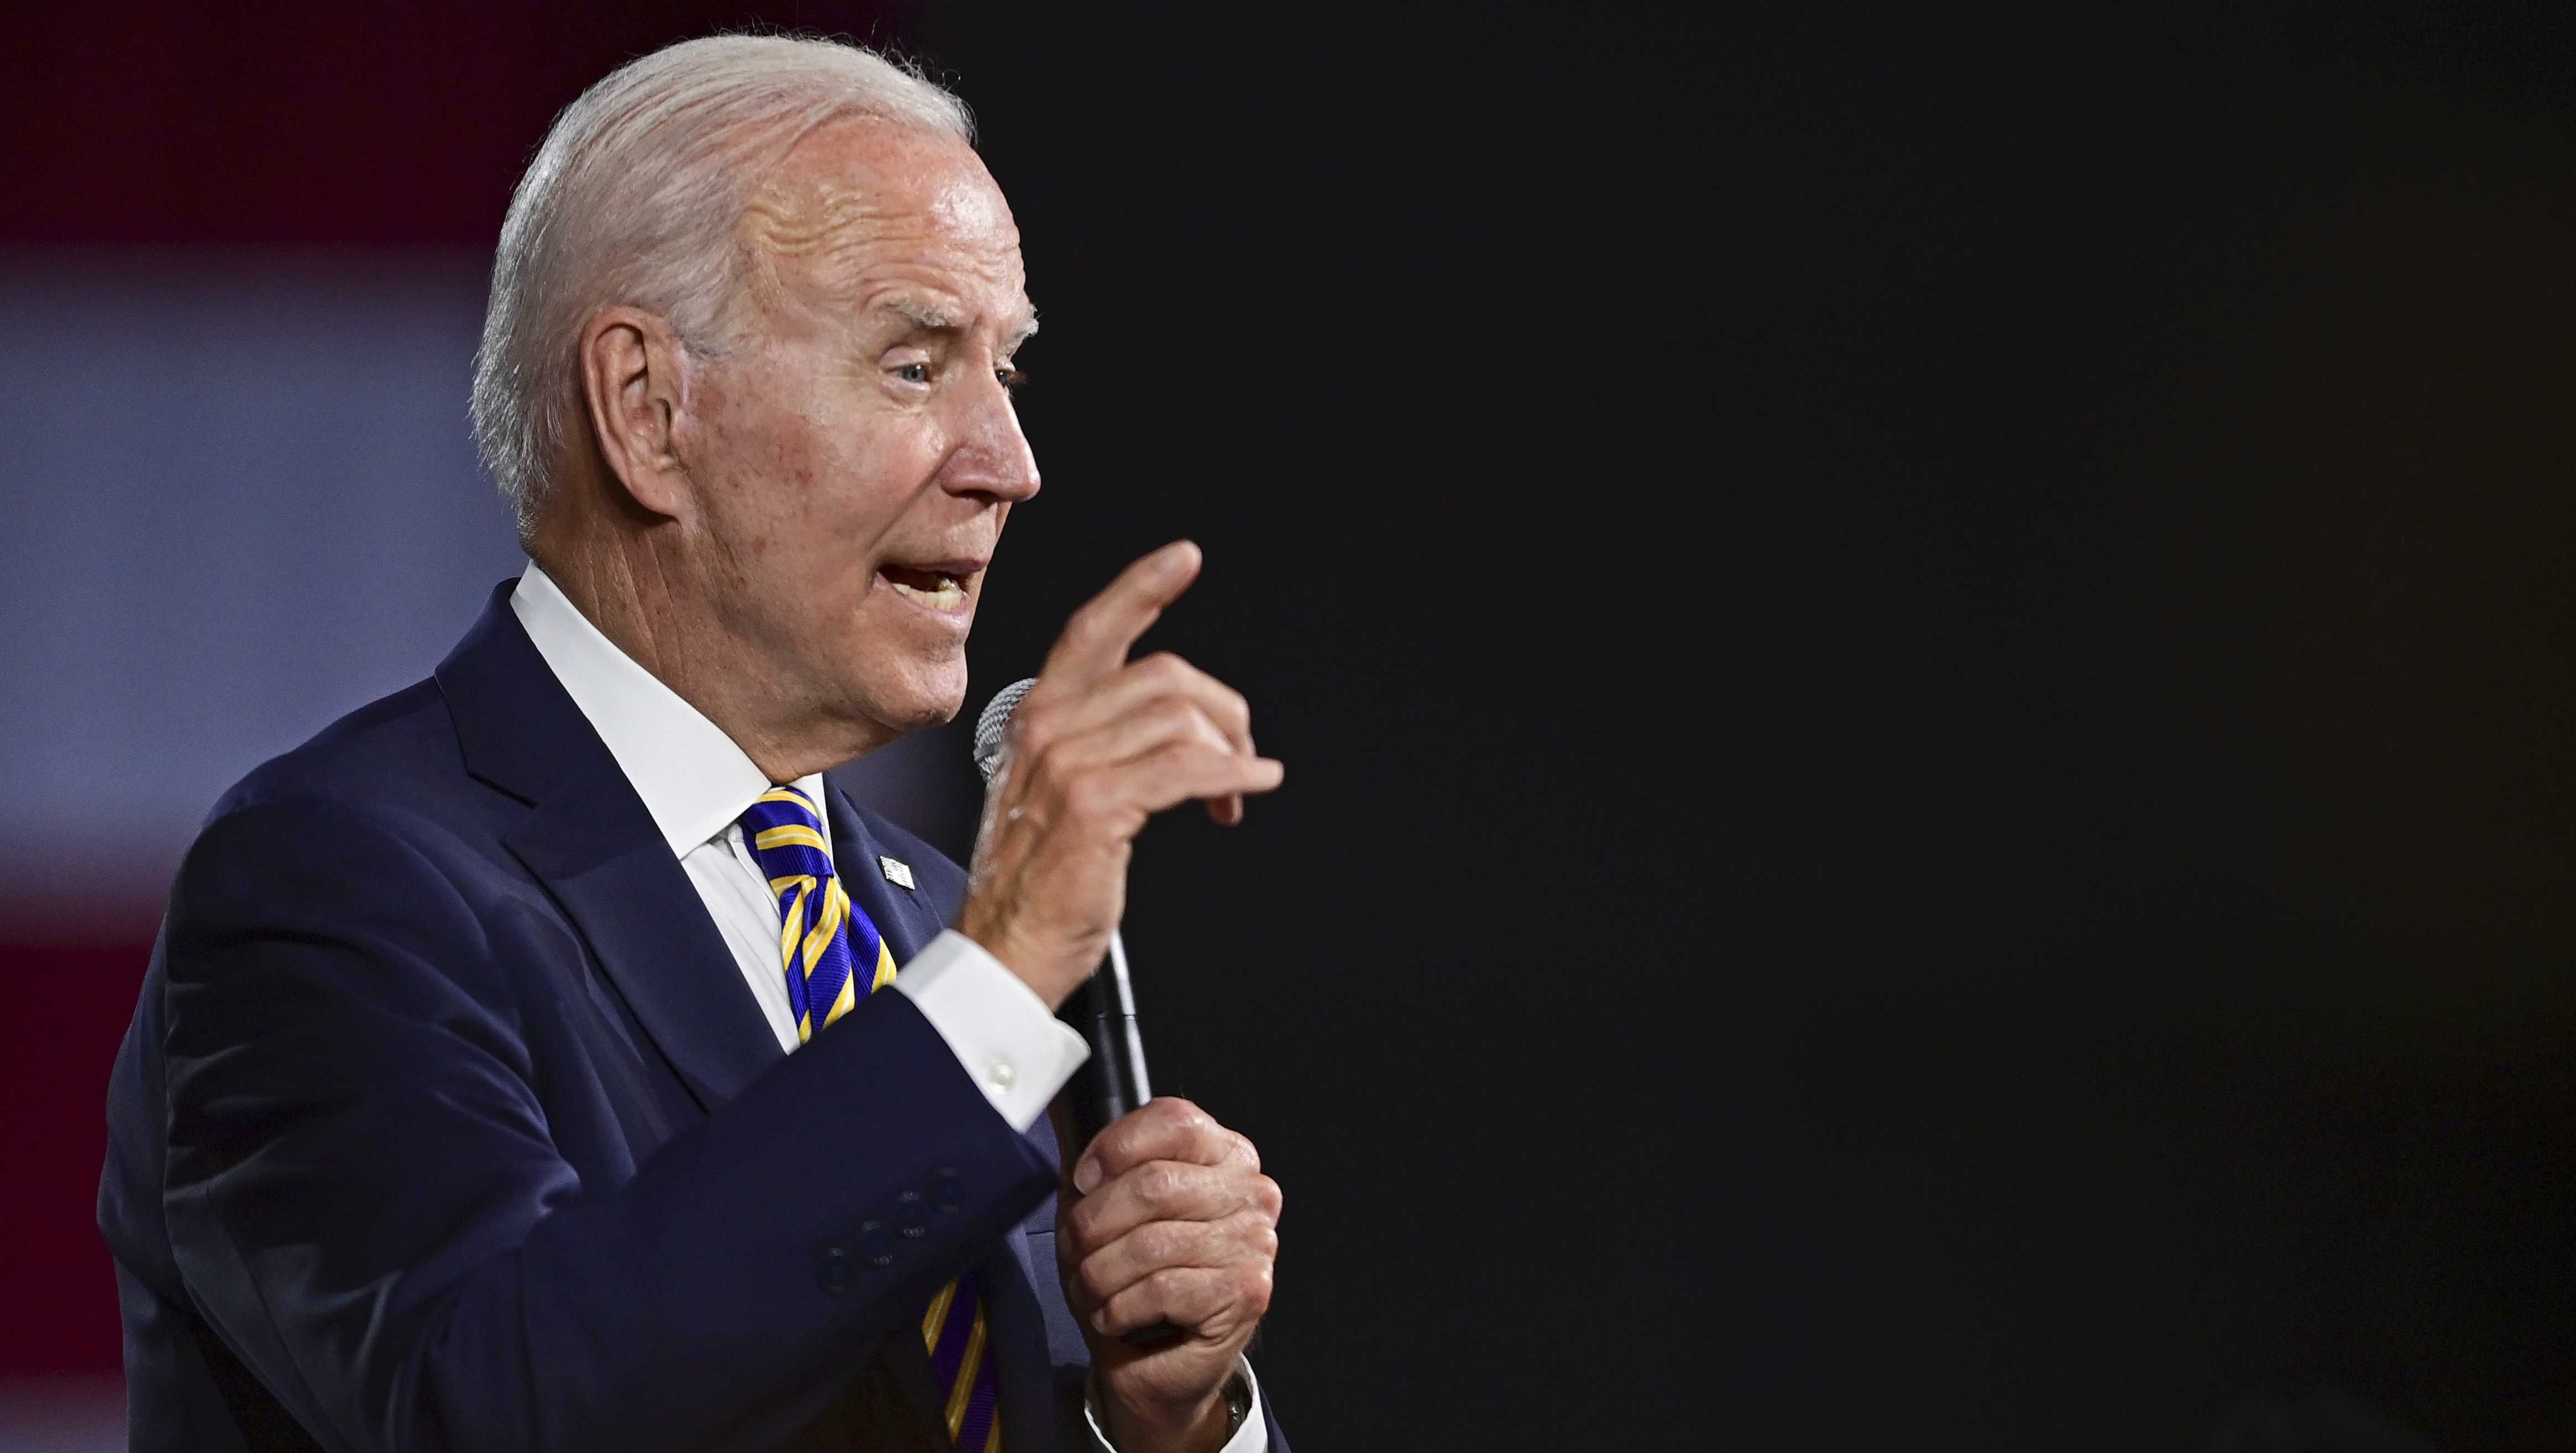 President Biden releasing nearly $36 billion to aid pensions of union workers